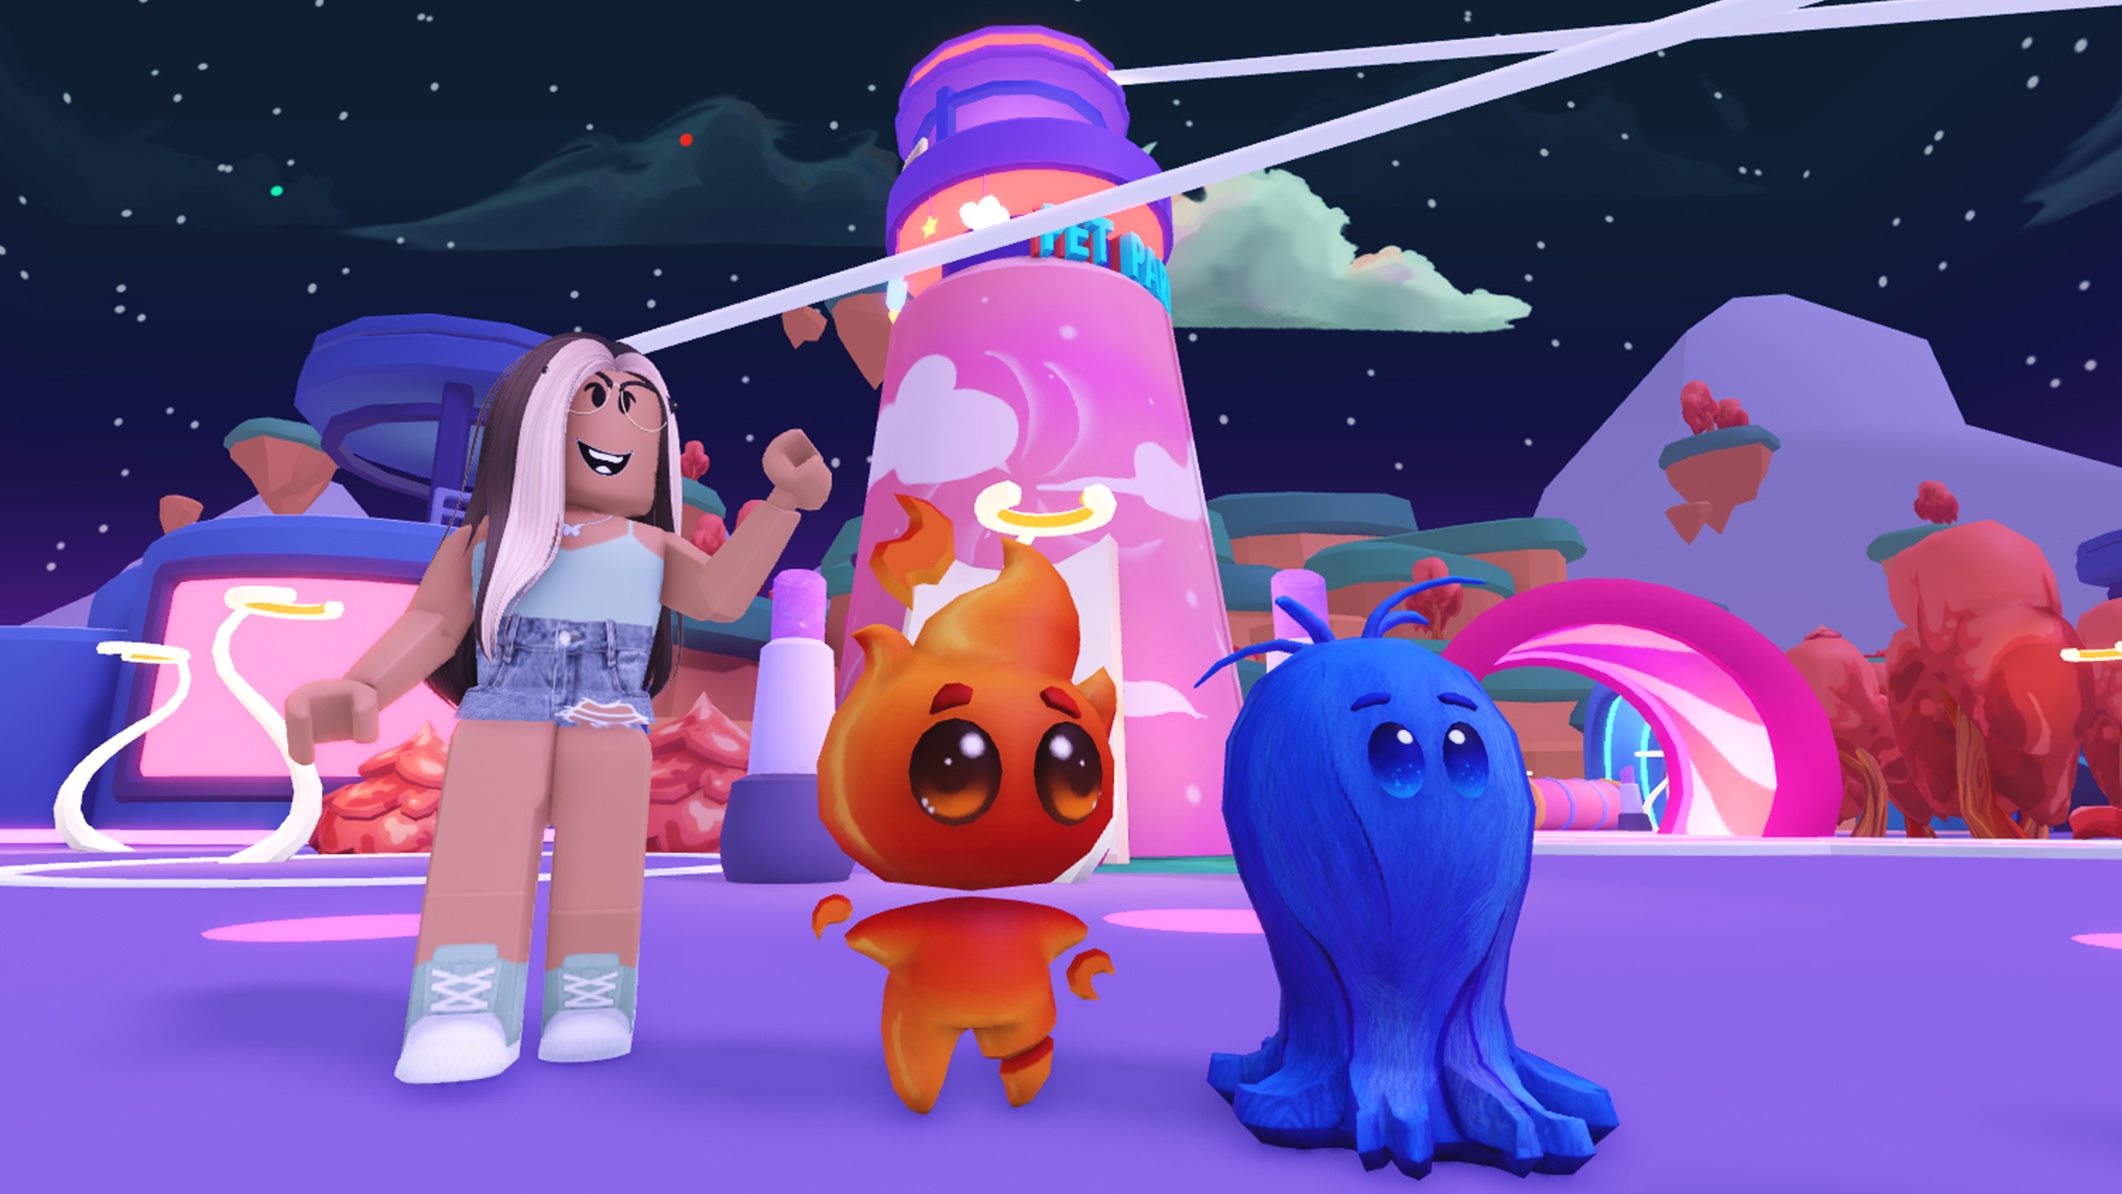 Exclusive Photos: Claire’s Enters The Metaverse With ShimmerVille, A Brand New Roblox Town